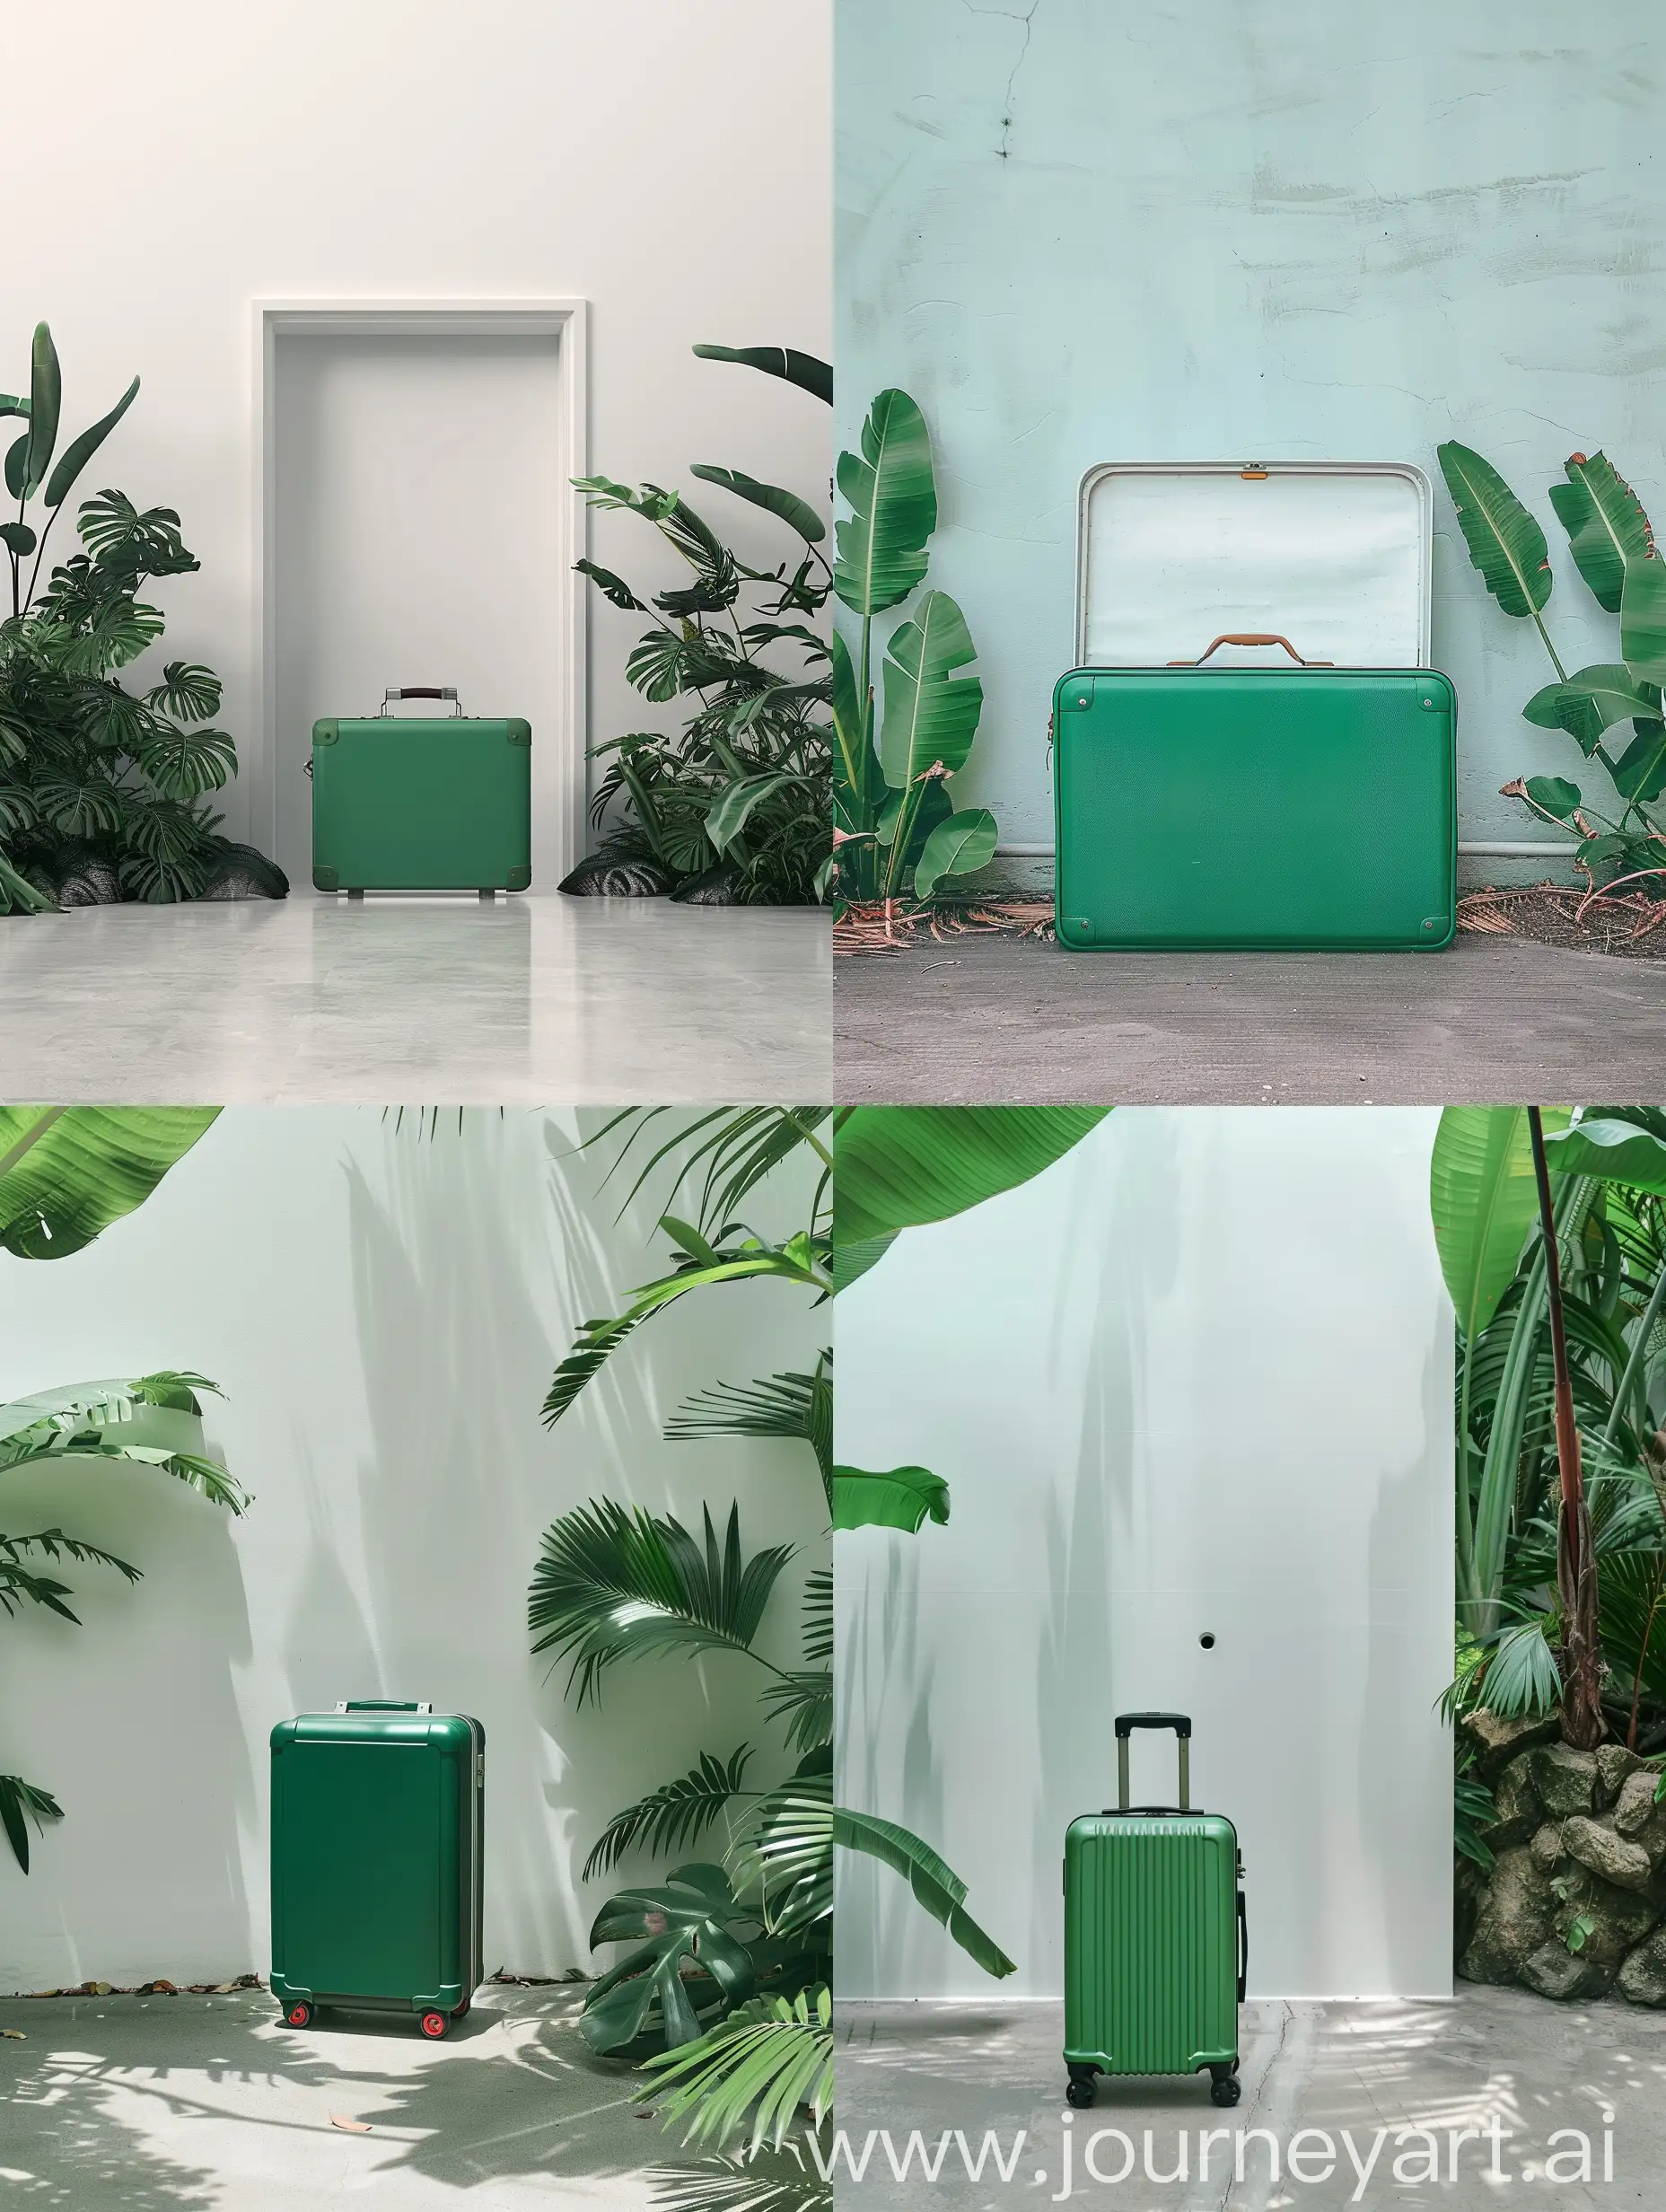 Minimalist-Green-Suitcase-Against-White-Wall-in-Exotic-Rainforest